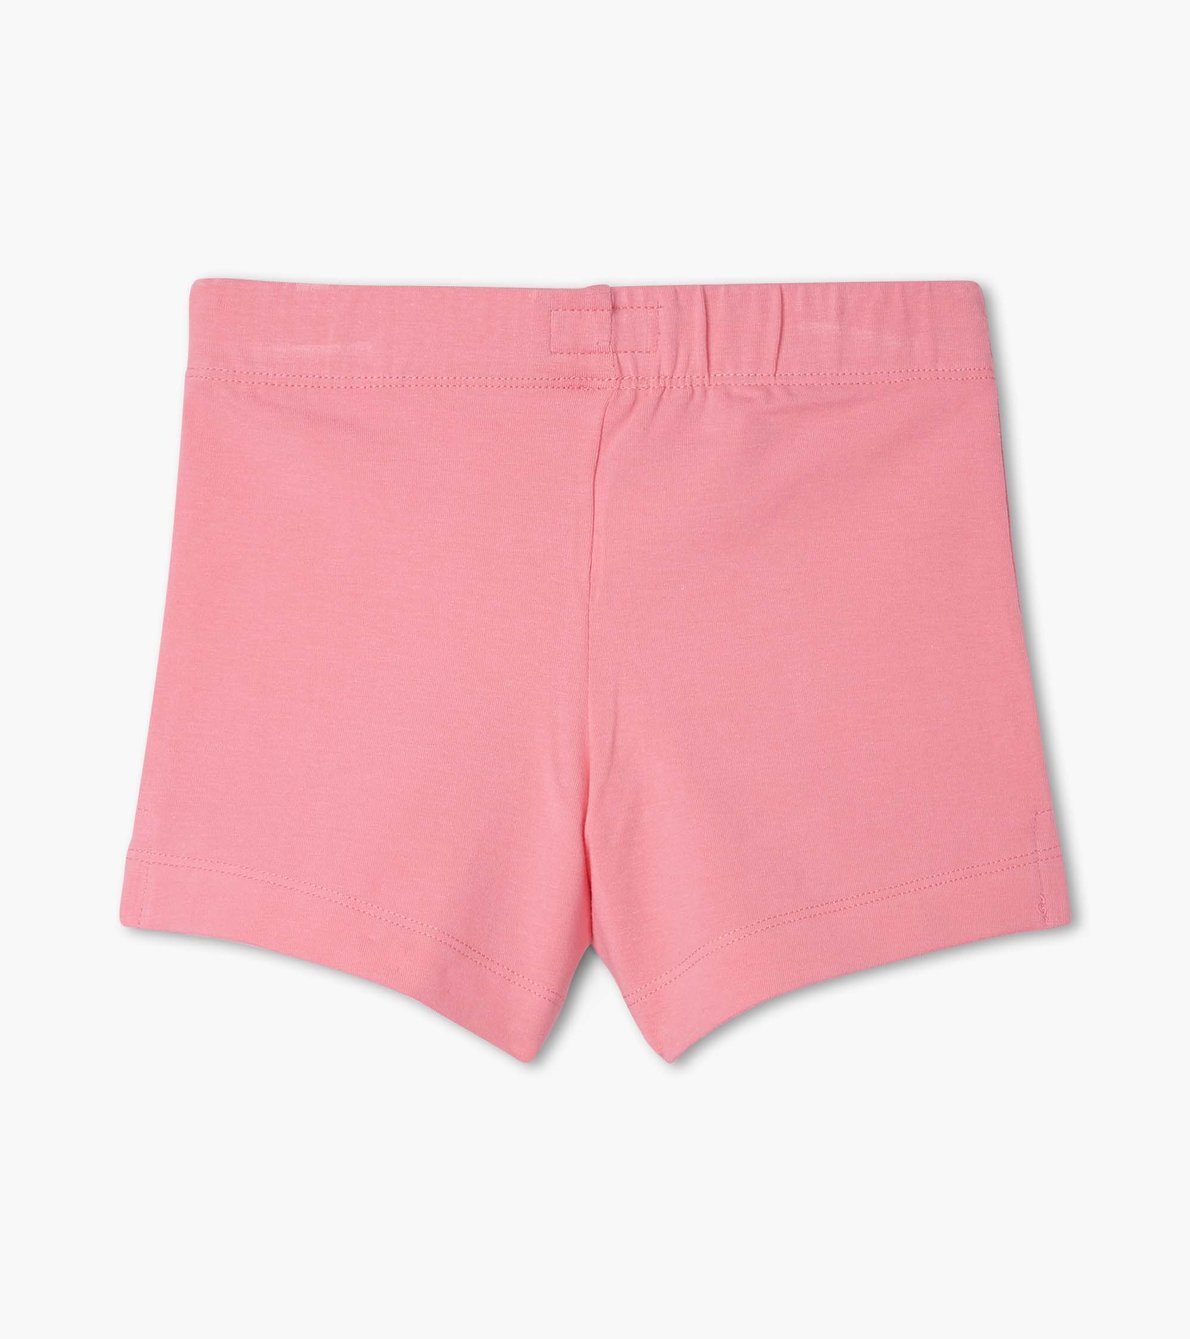 View larger image of Light Pink Bicycle Shorts